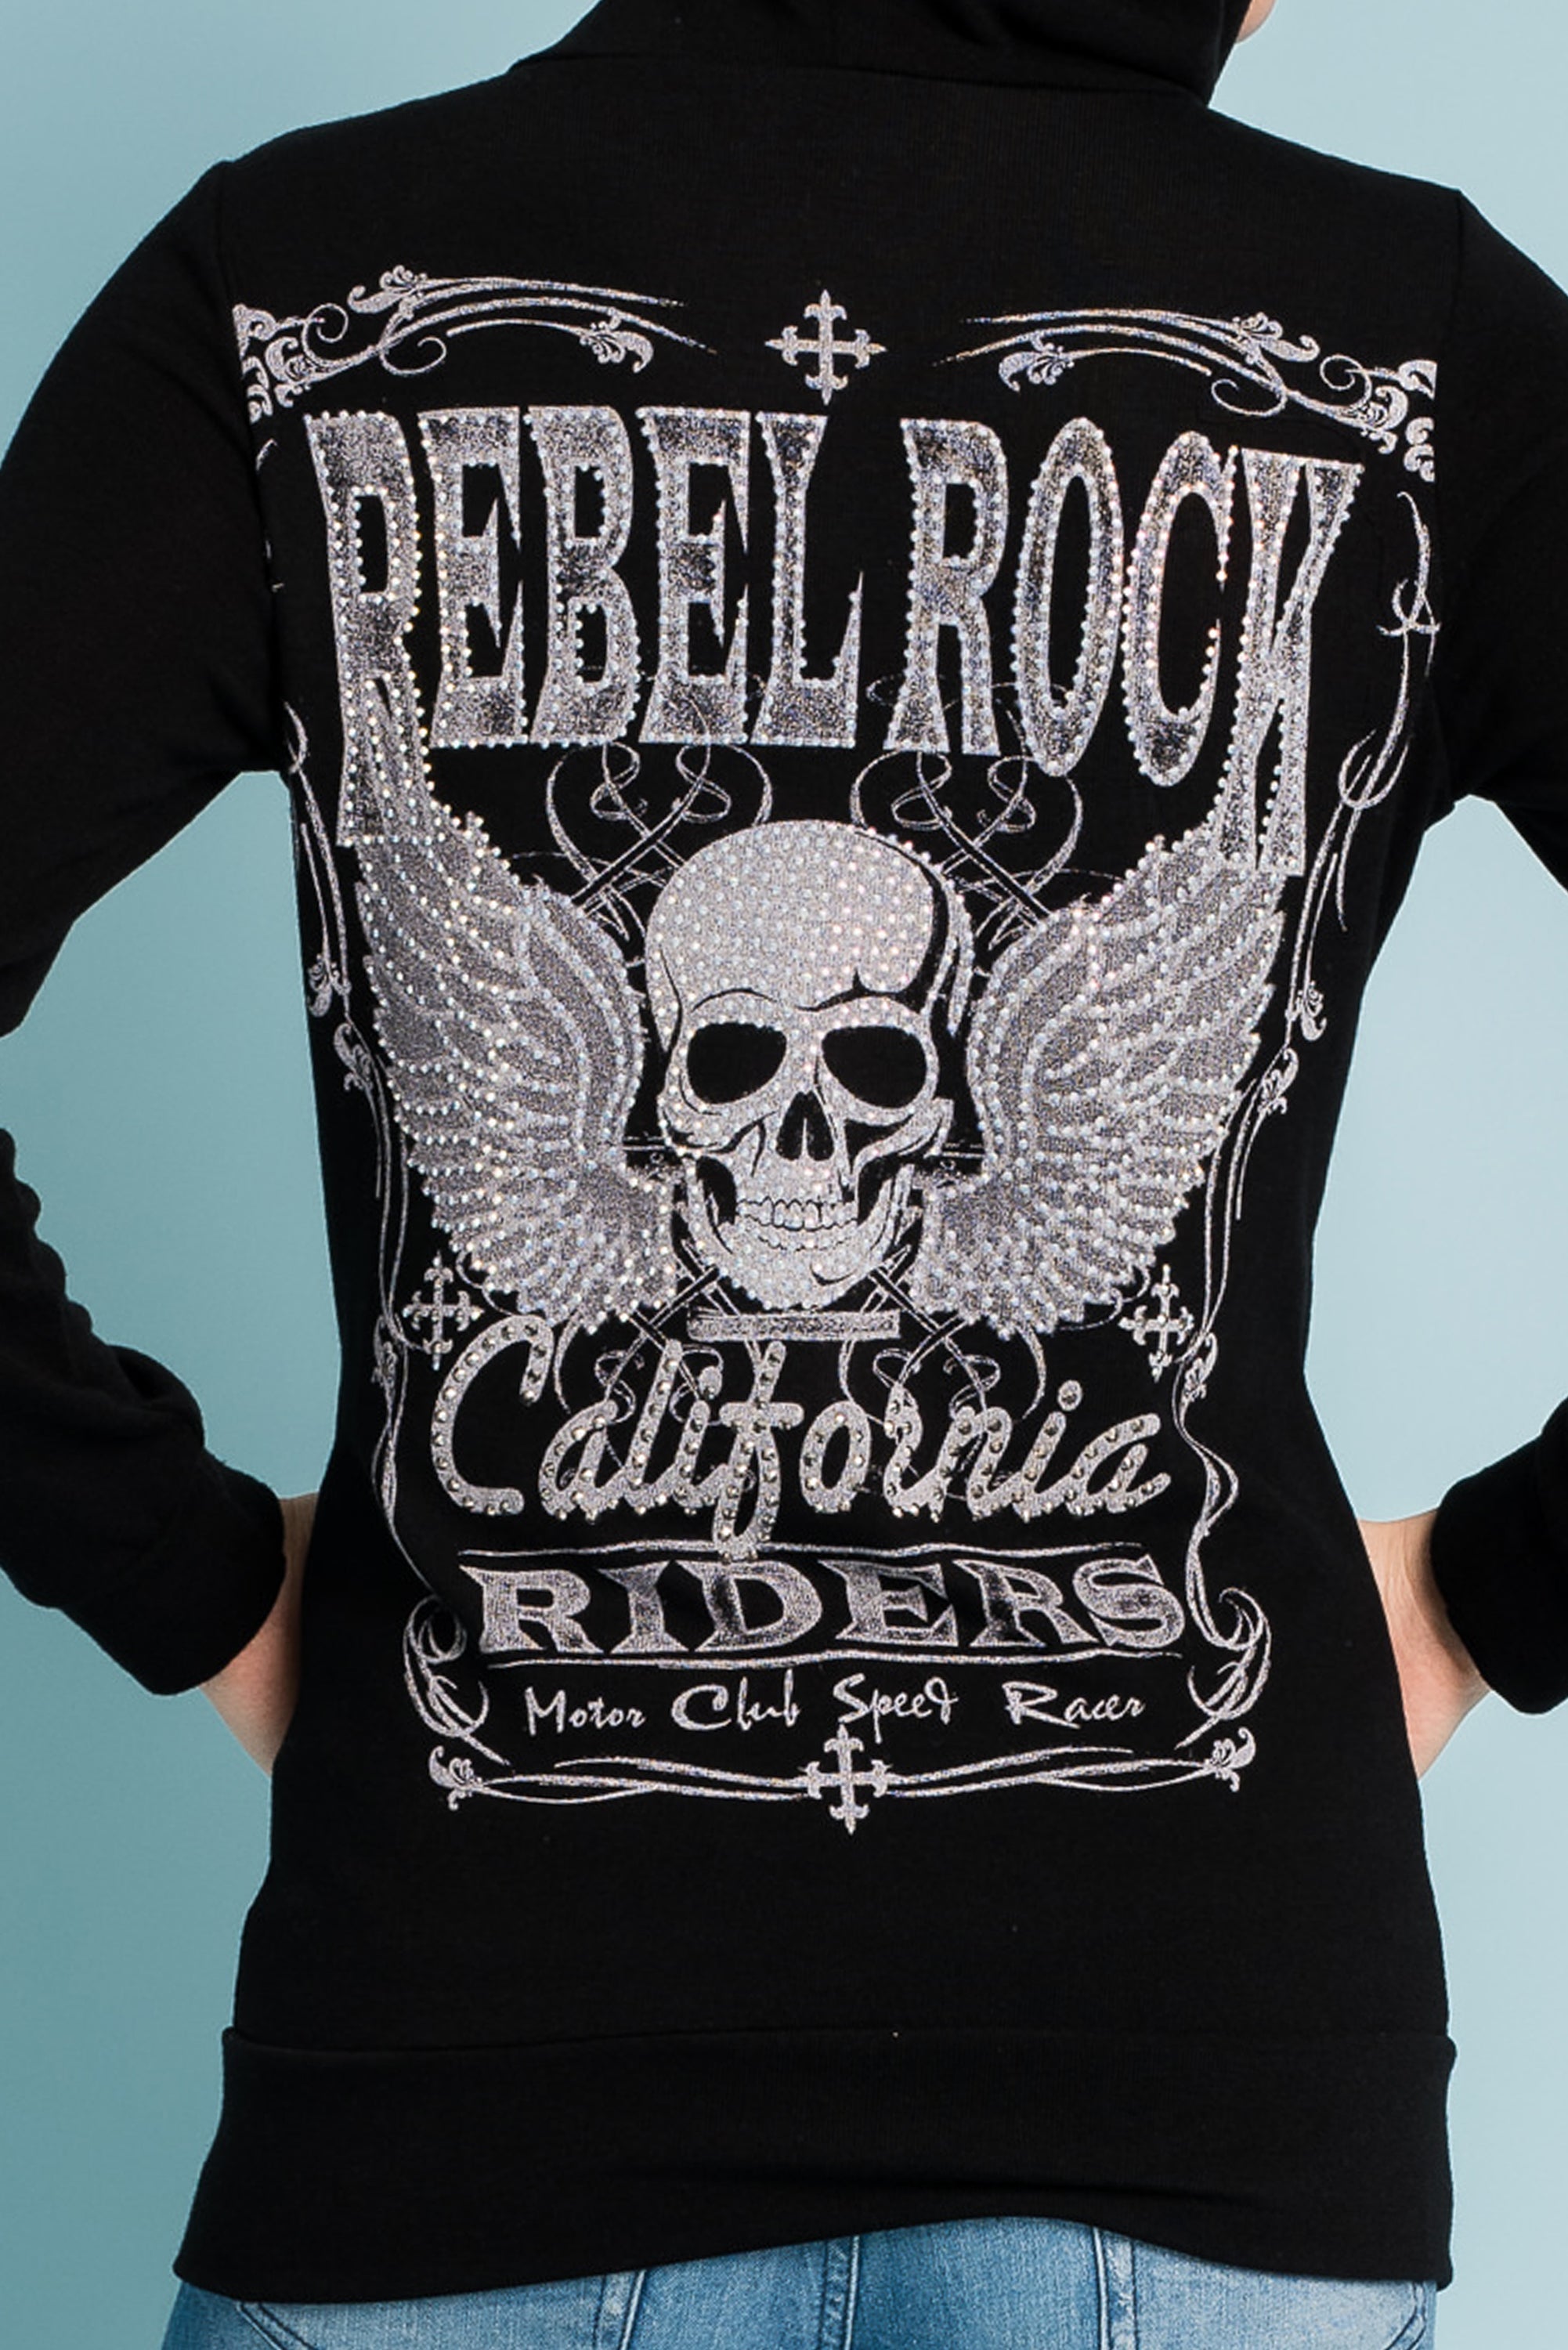 Rebel rock bikers prints Skull and wings with stones details Hooded with pockets tattoo graphic print rhinestone PUNK BIKER TOP